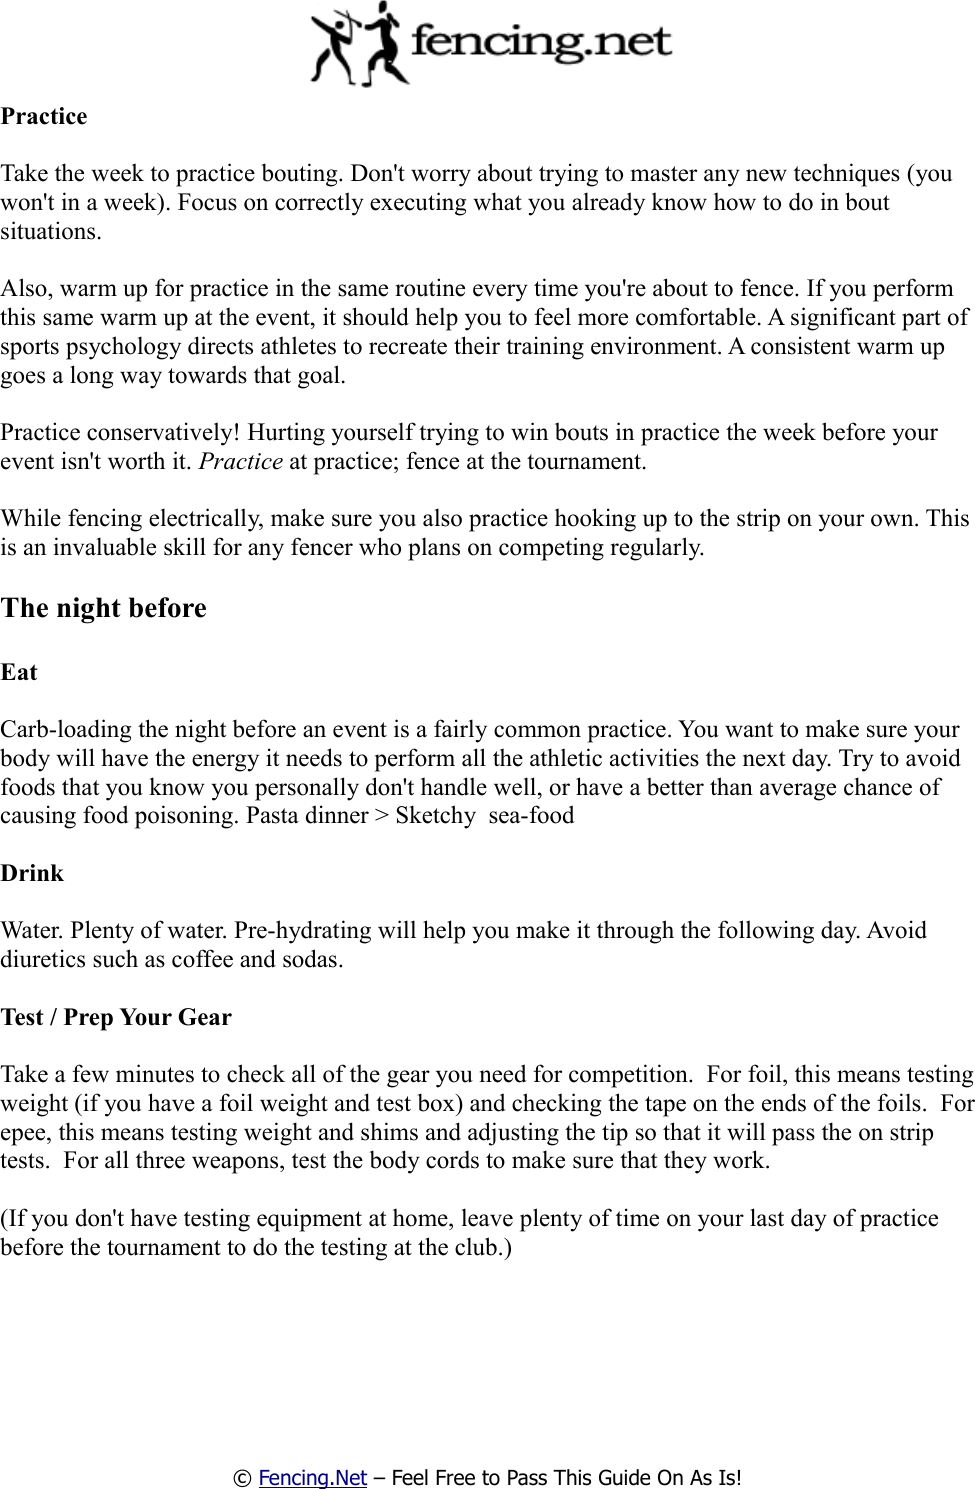 Page 3 of 10 - A Beginner's Guide To Their First Fencing Tournament